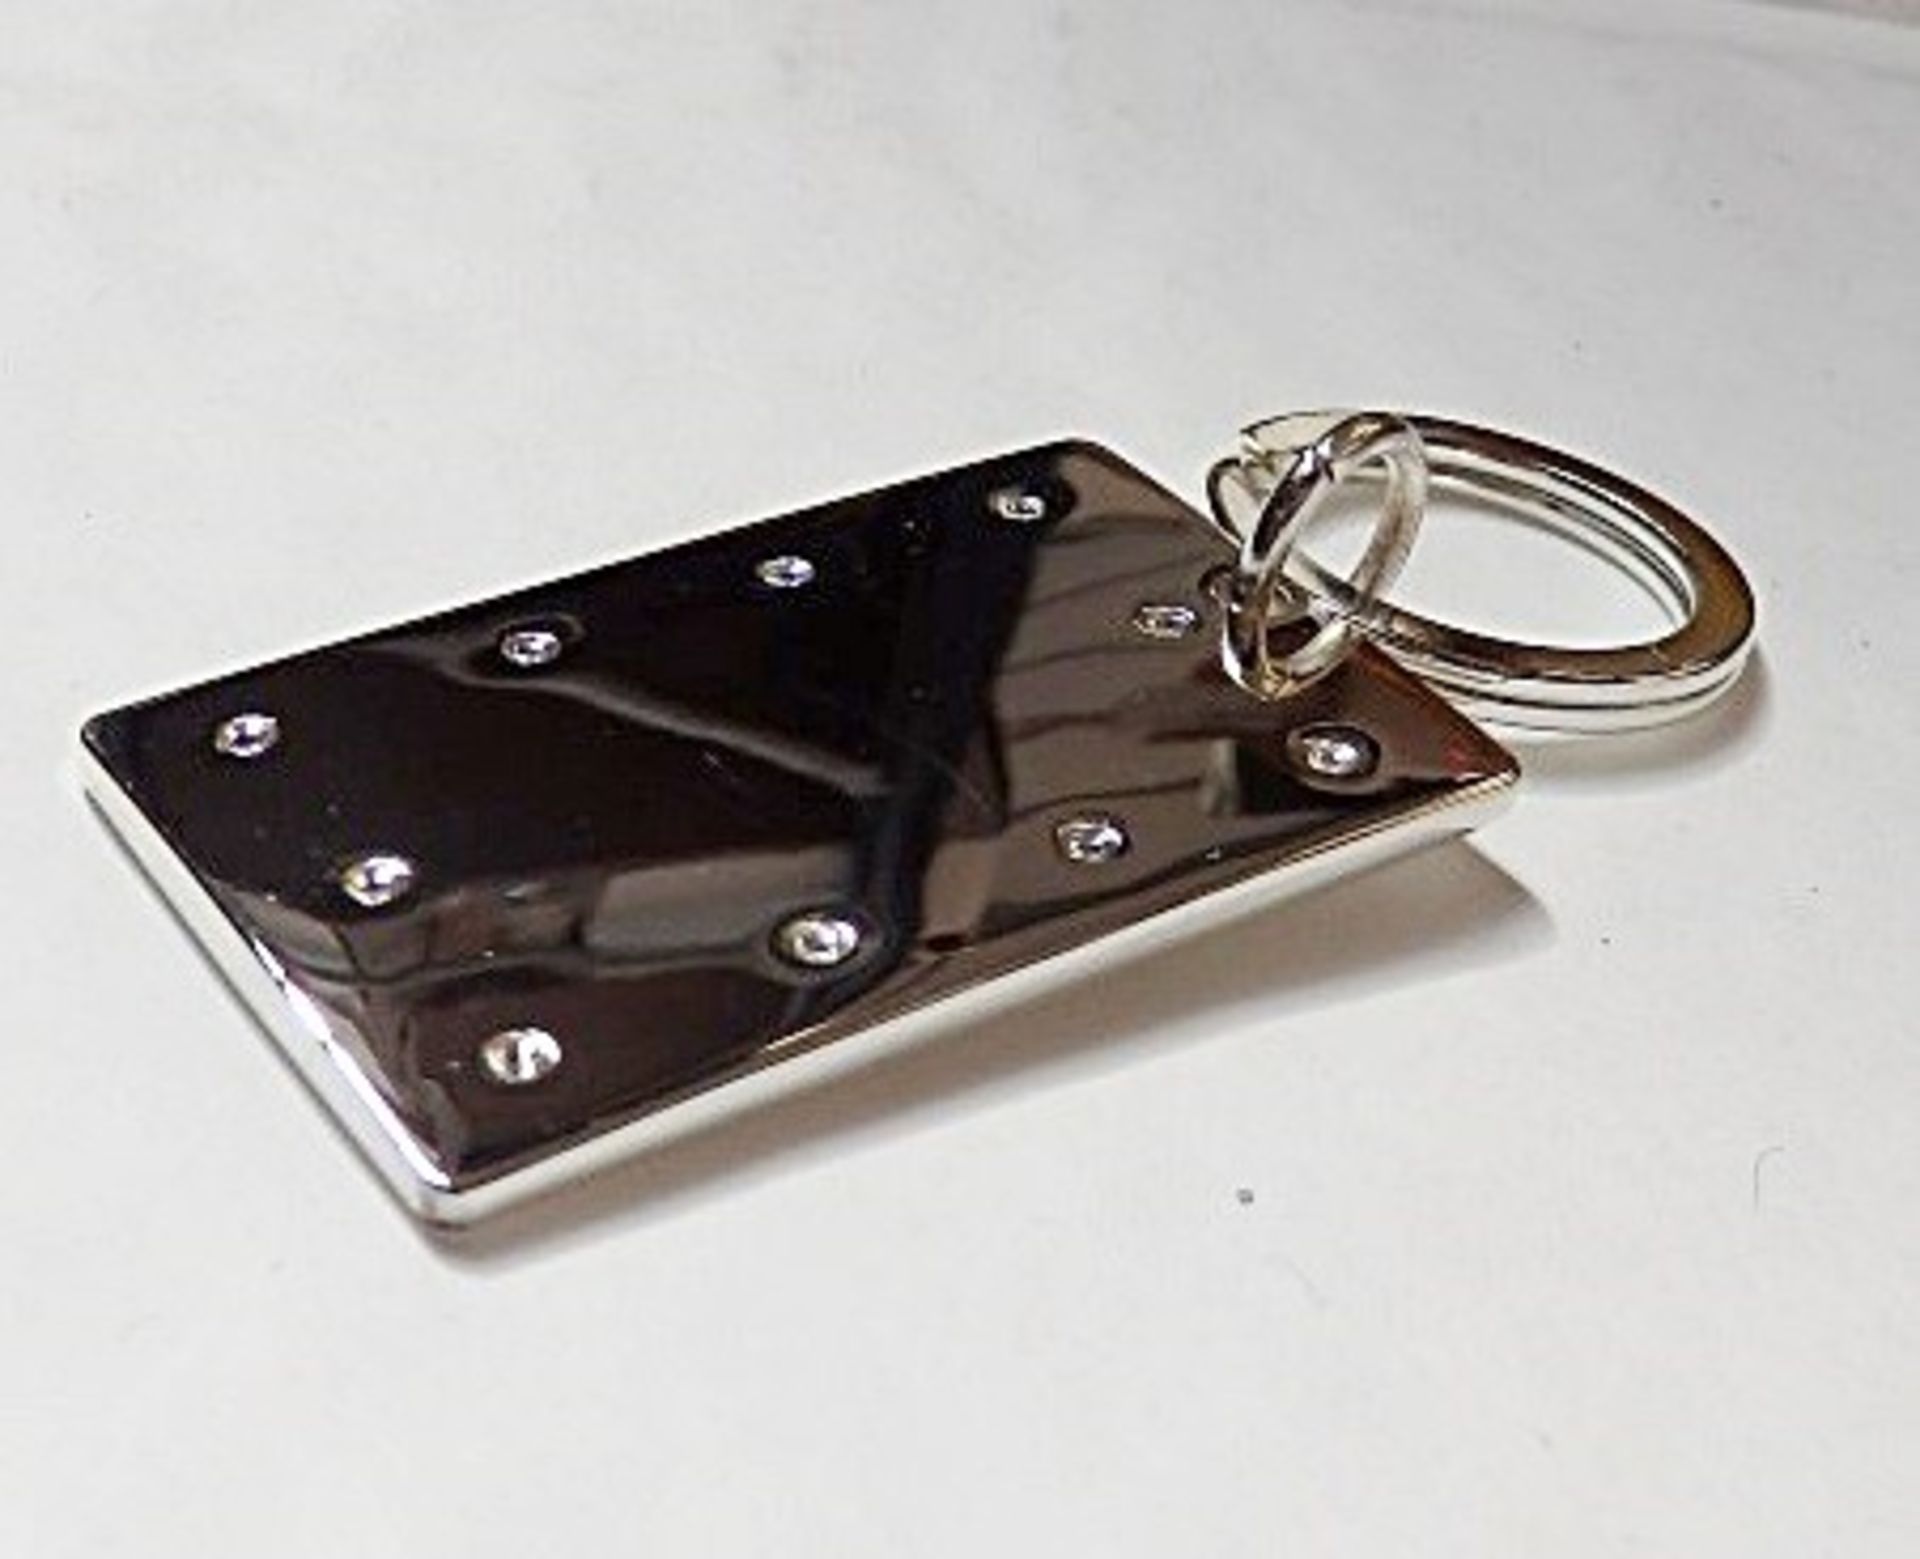 50 x Silver Plated Rectangular Key Rings By ICE London - MADE WITH "SWAROVSKI¨ ELEMENTS - Luxury - Image 5 of 6